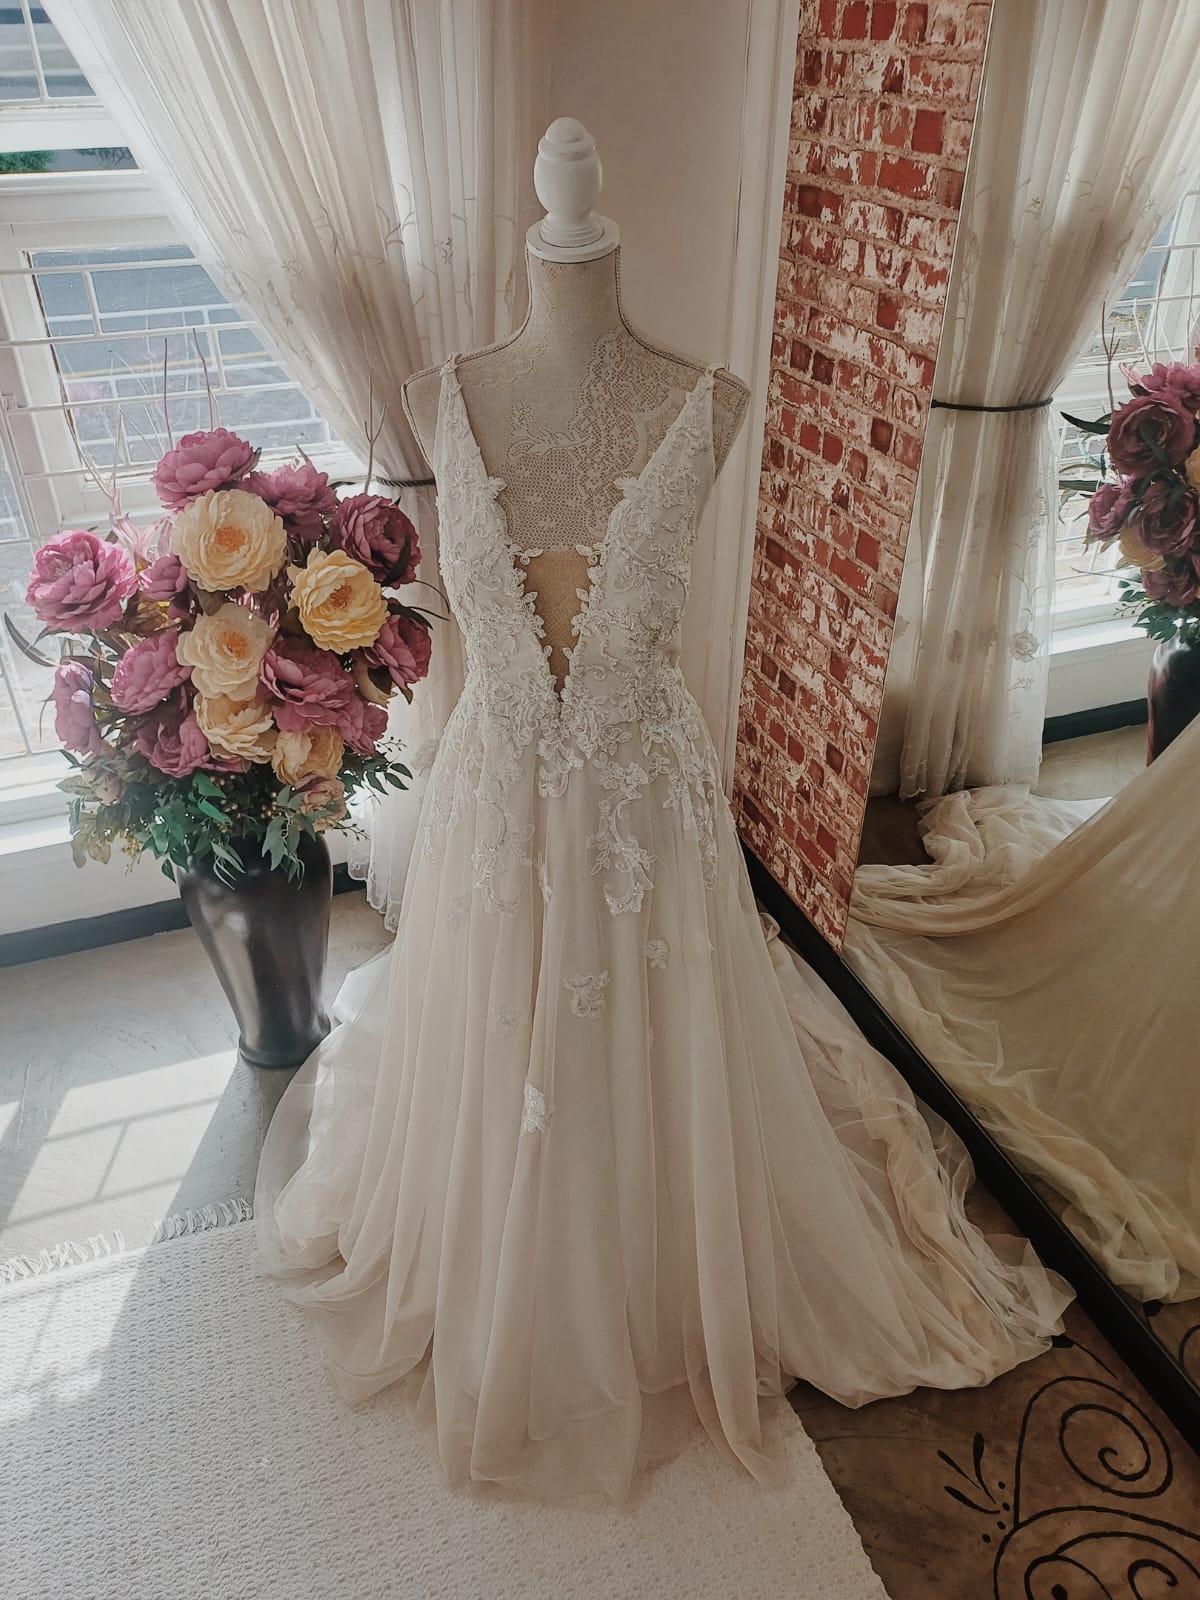 HIRE BRIDAL GOWN - HF4191 - ELEVATE YOUR BRIDAL LOOK WITH A BATEAU NECKLINE LACE BODICE AND A BLUSH TULLE PRINCESS BALL GOWN SKIRT. THIS COMBINATION EXUDES A SENSE OF CLASSIC ELEGANCE AND ROMANCE FOR YOUR SPECIAL DAY.